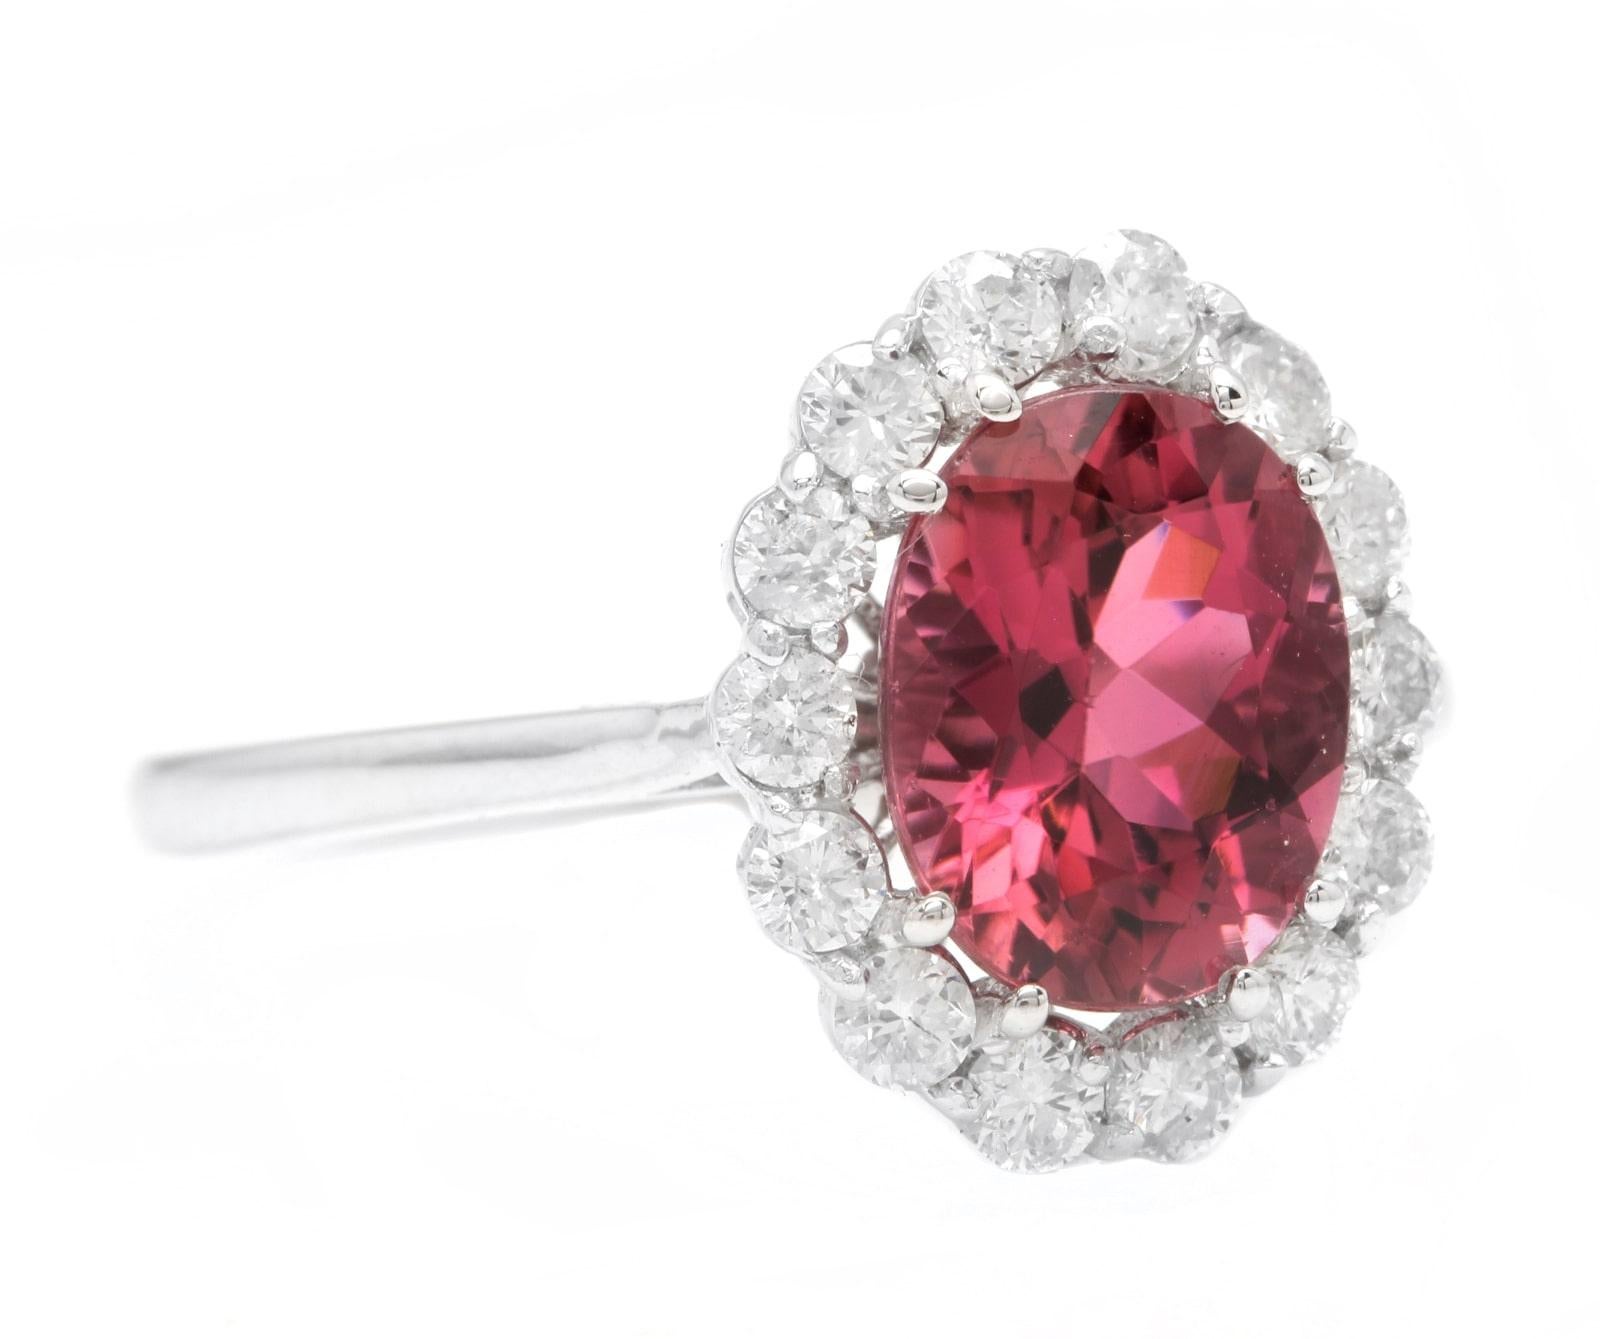 2.80 Carats Natural Very Nice Looking Tourmaline and Diamond 14K Solid White Gold Ring

Suggested Replacement Value:  $4,500.00

Total Natural Oval Cut Tourmaline Weight is: Approx. 2.20 Carats

Tourmaline Measures: Approx. 9.00 x 7.00mm

Natural